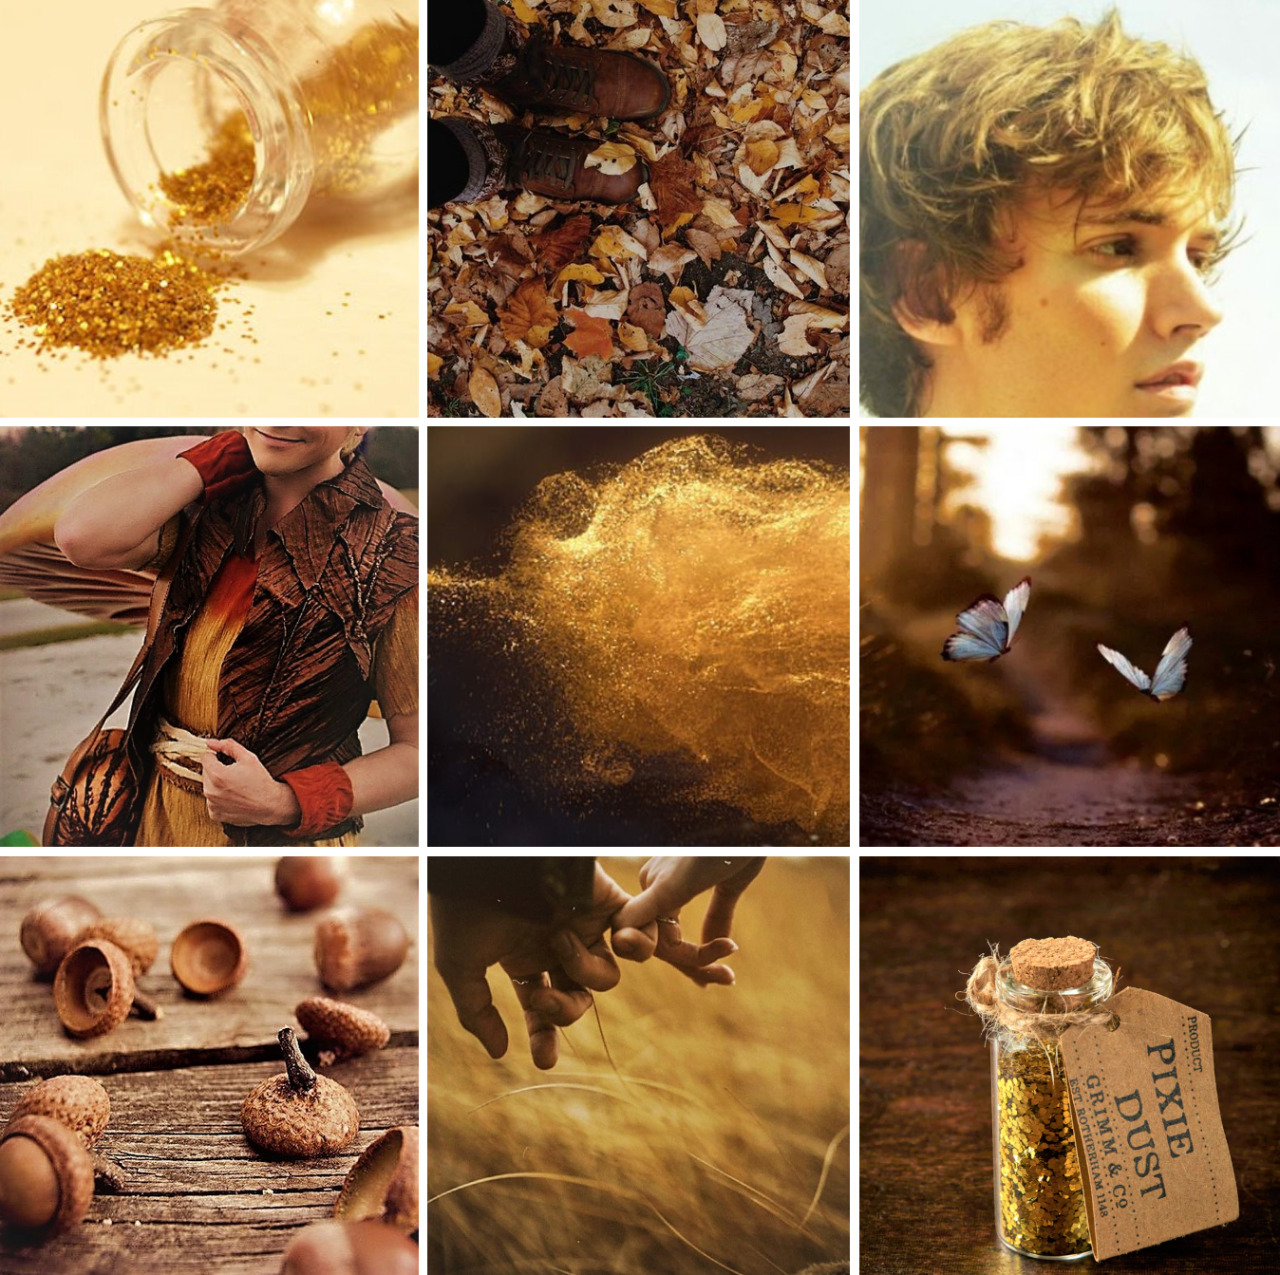 Character Moodboards // TerenceForevers a pretty long time, so I hear. #terence#disney fairies#disney#characters#character moodboards#moodboards#aesthetics#my moodboards#my edits